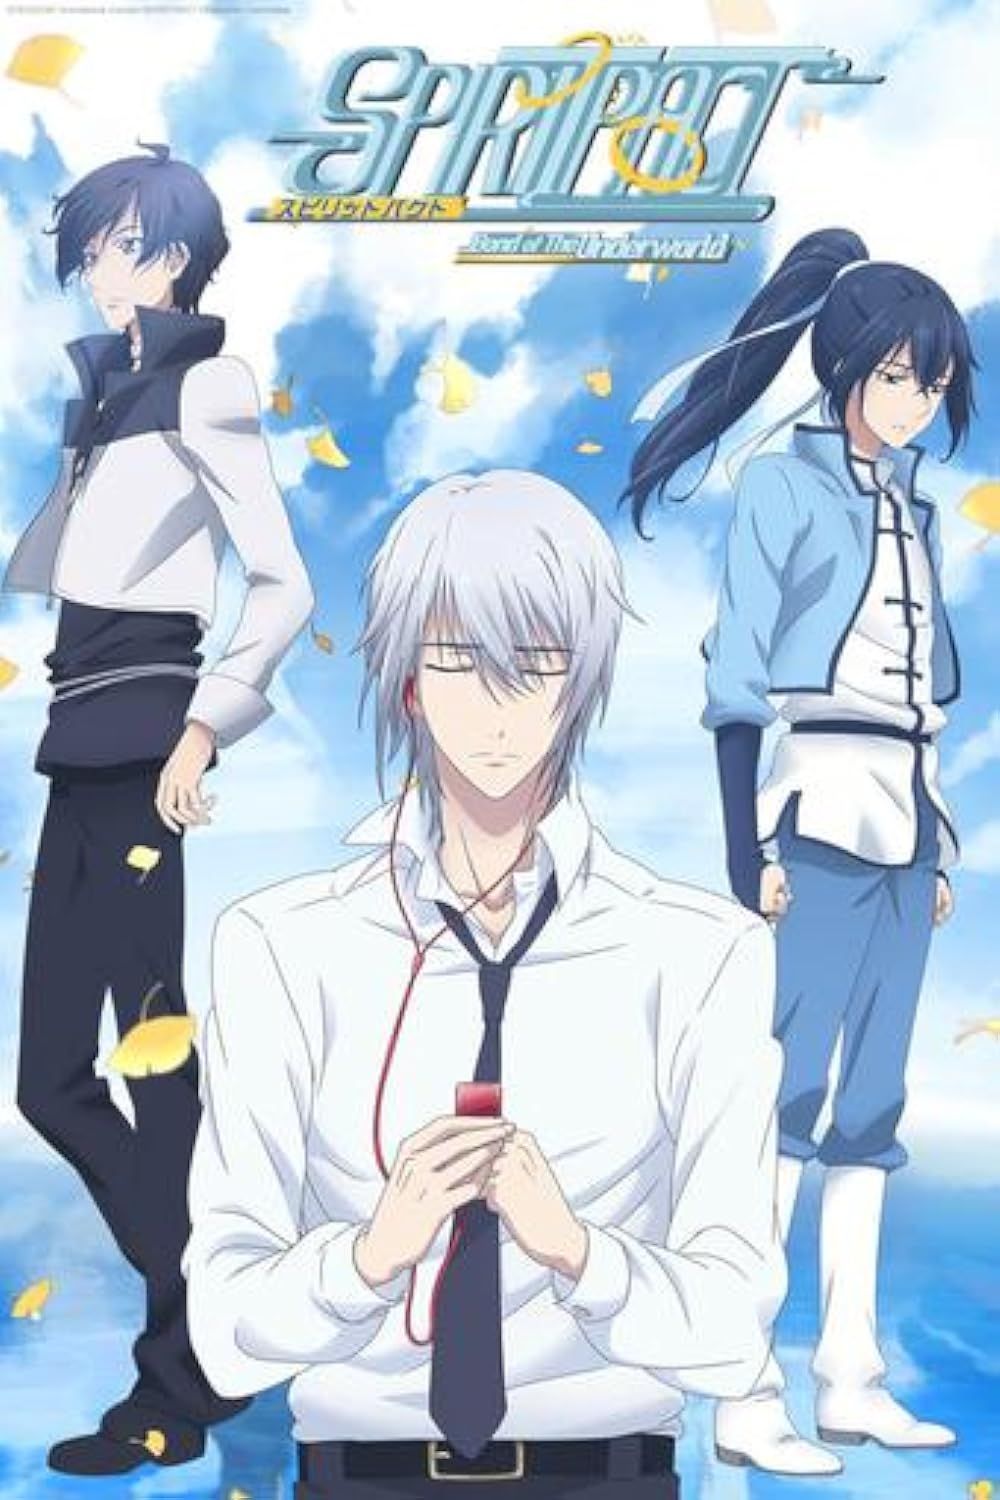 The cast of Spiritpact posing on the official poster. 